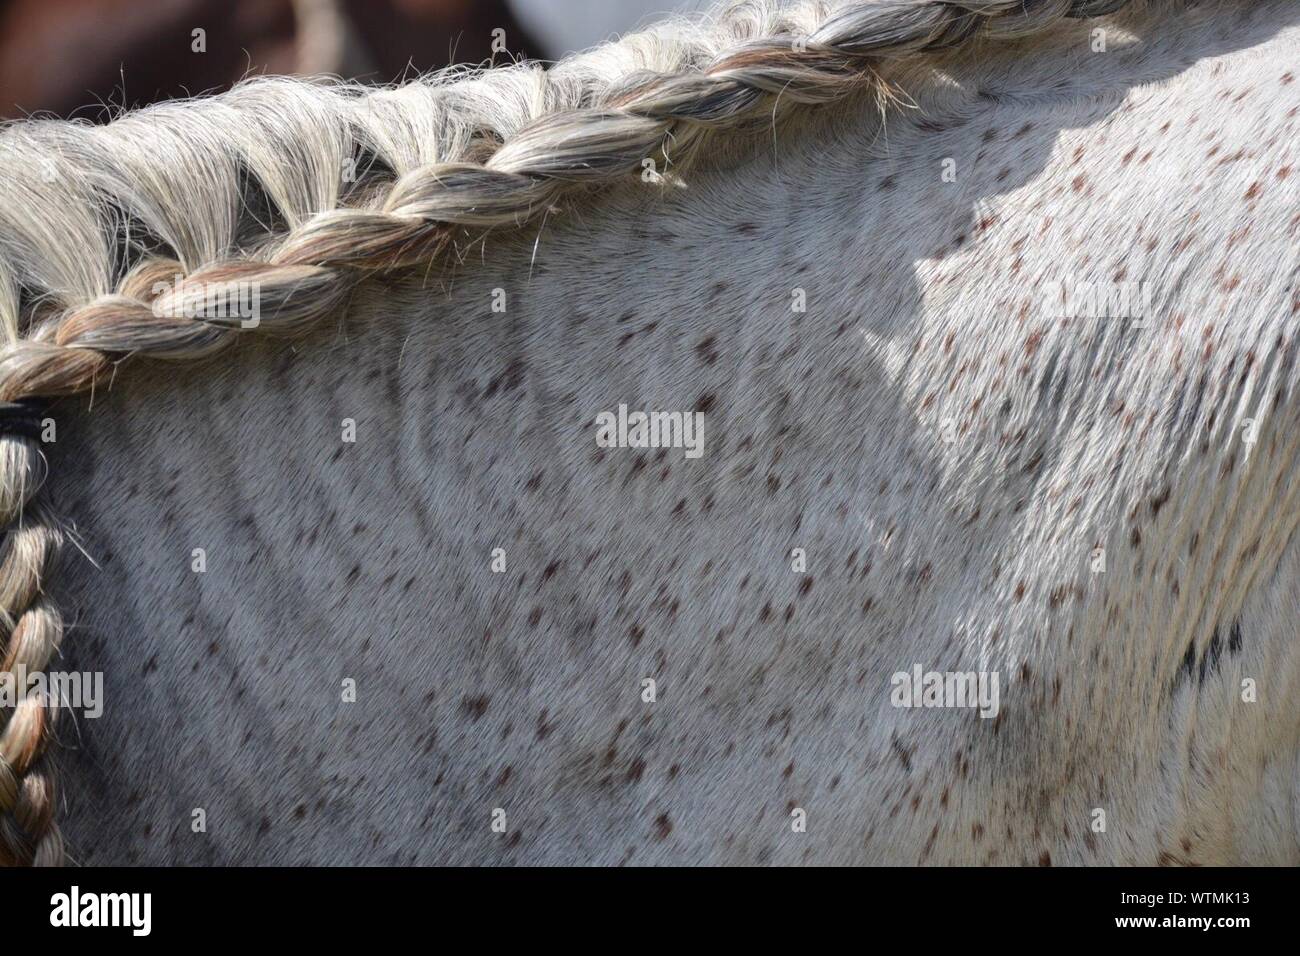 Close-up Of Horse With Braids Stock Photo